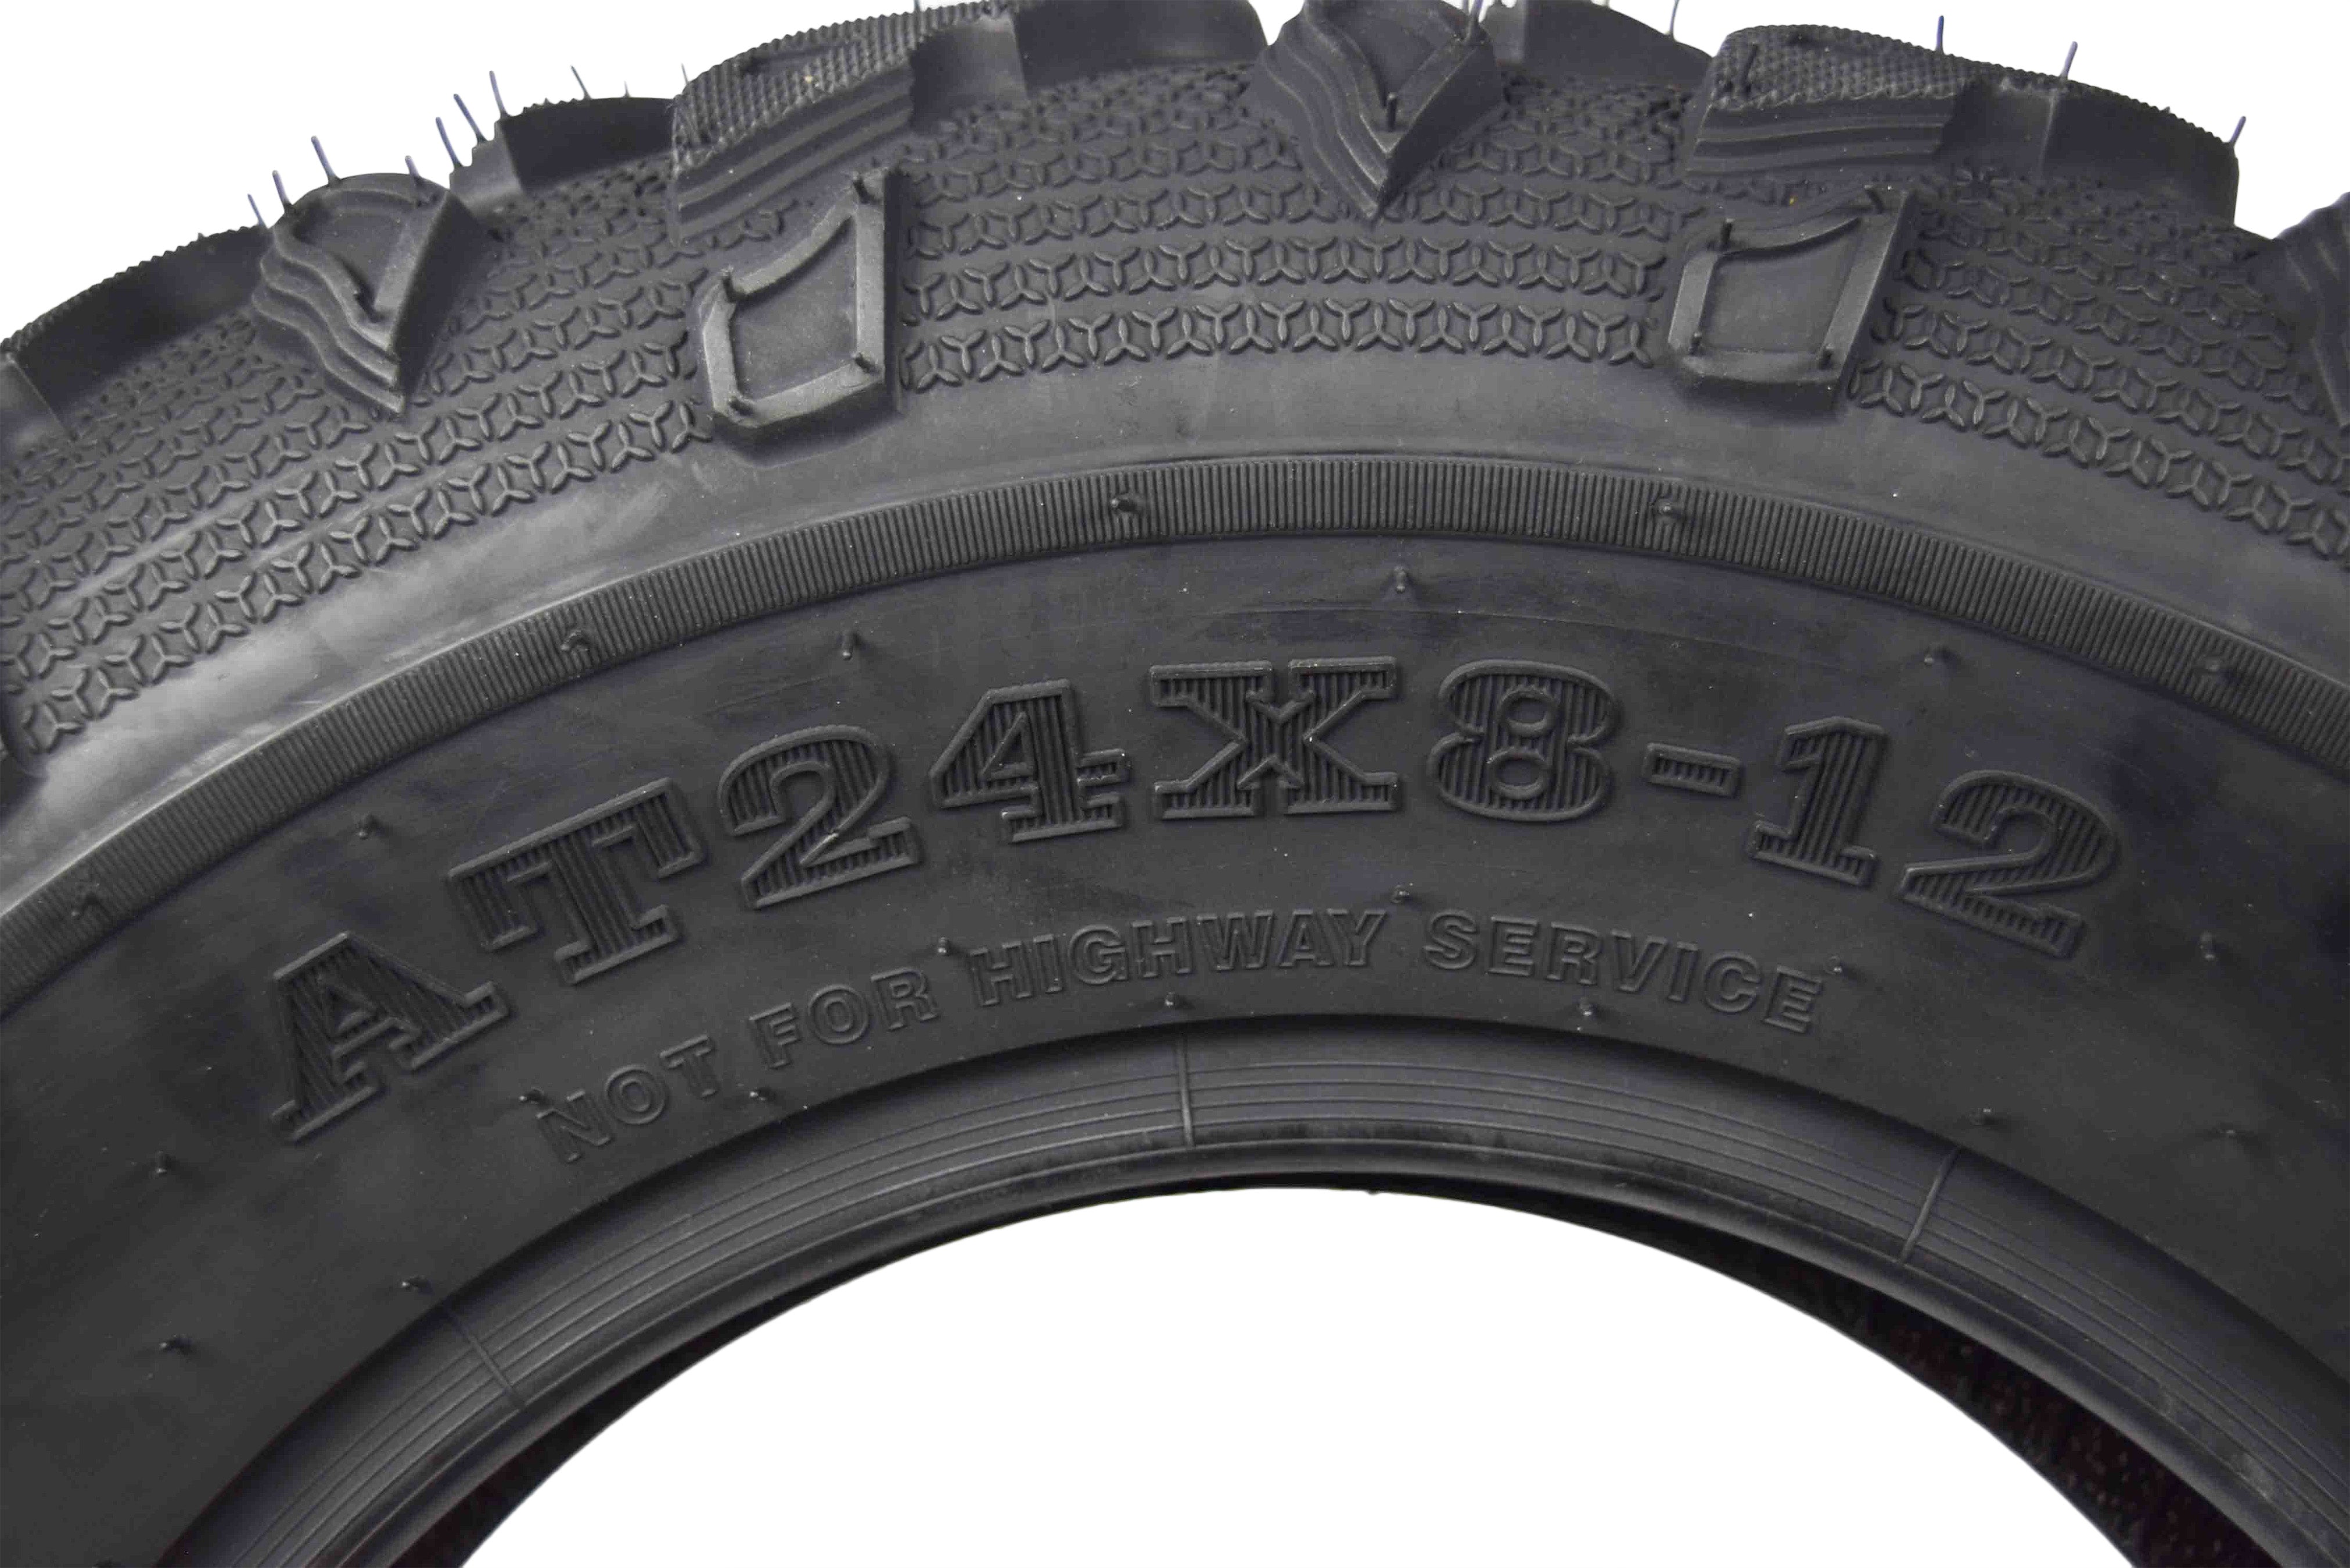 MASSFX Grinder 24x8-12 Front ATV Tire 6 Ply for Soft/Hard Pack Ground